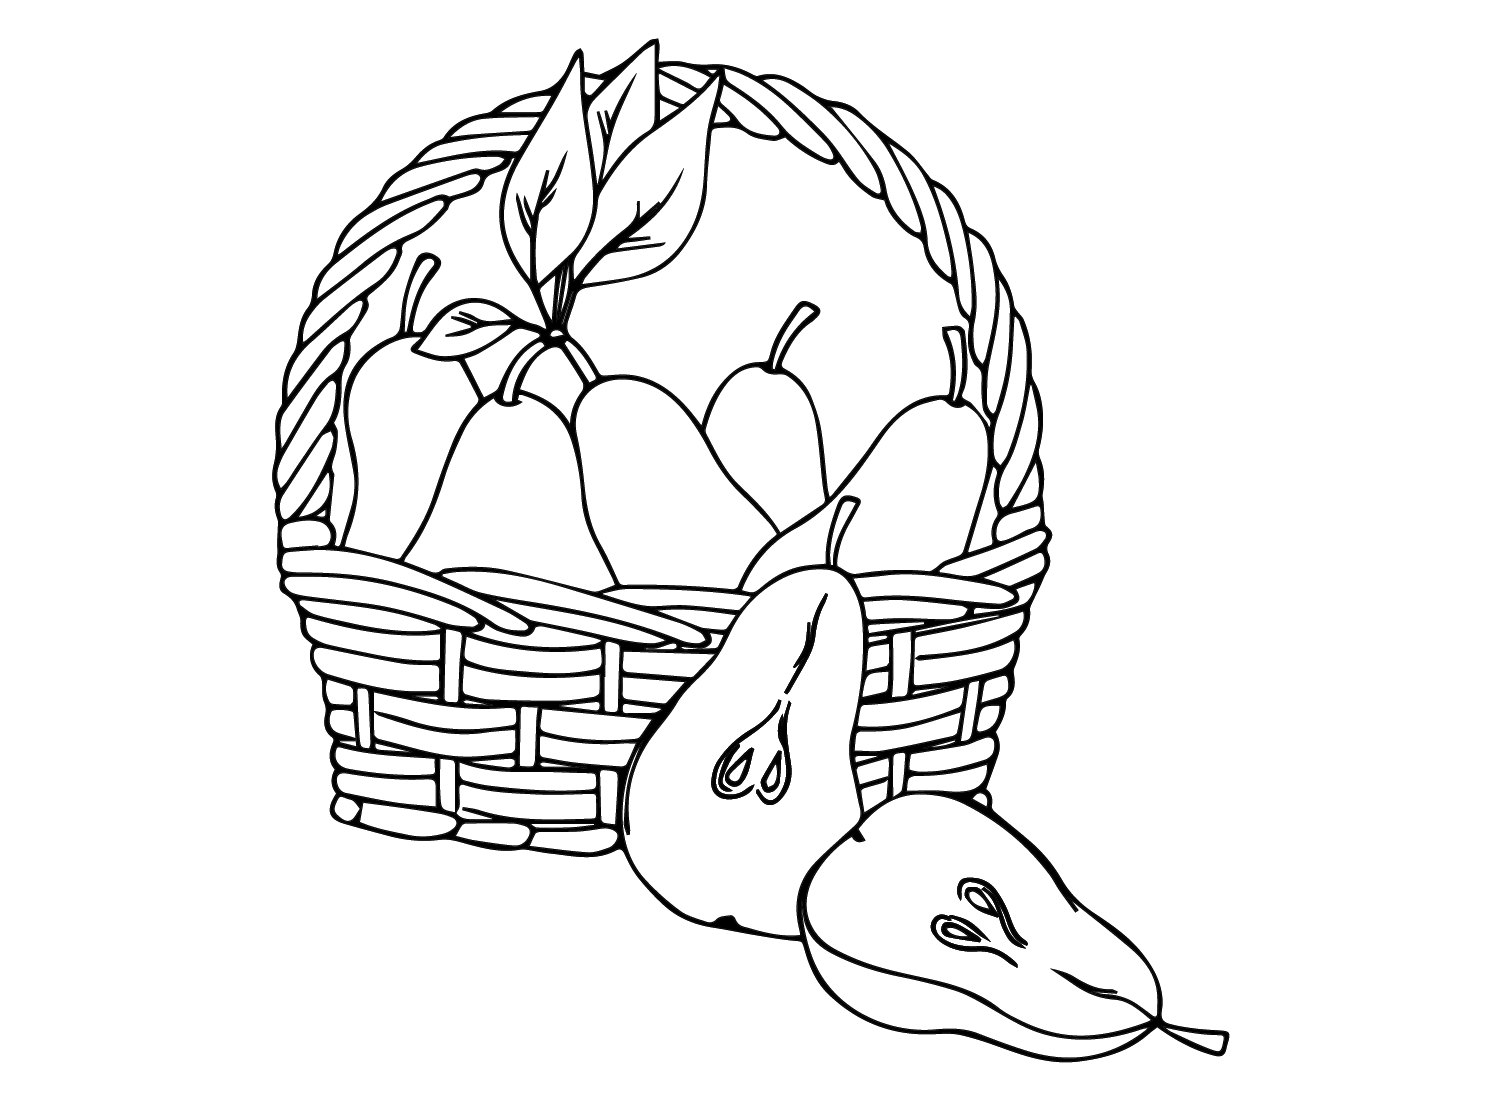 Pear Basket from Pears